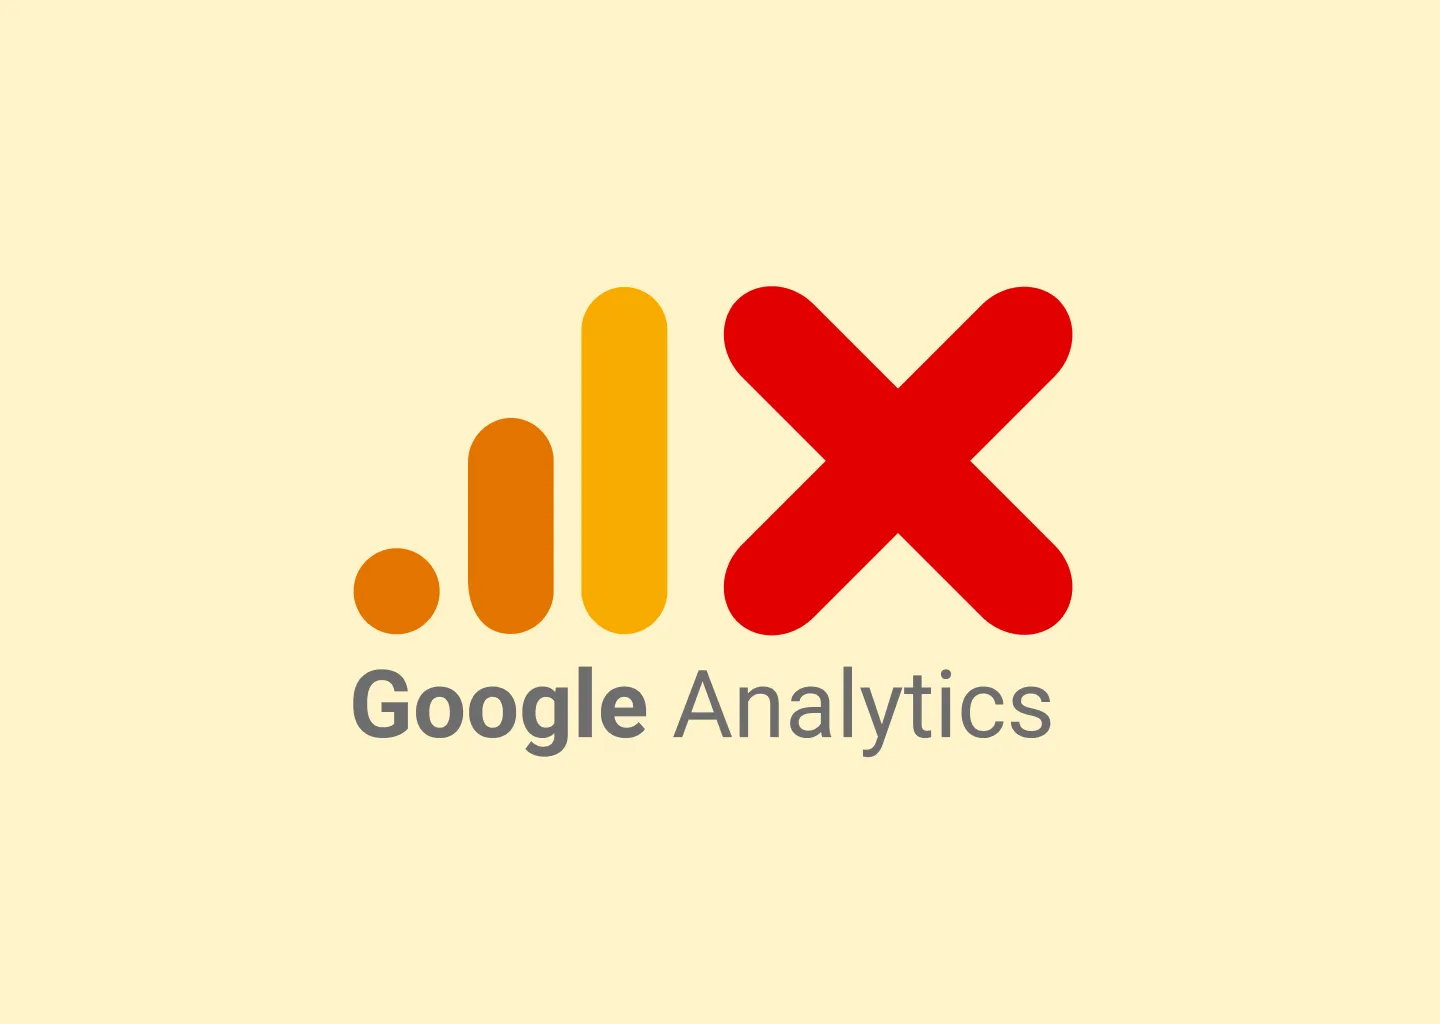 Google Analytics logo with a red X